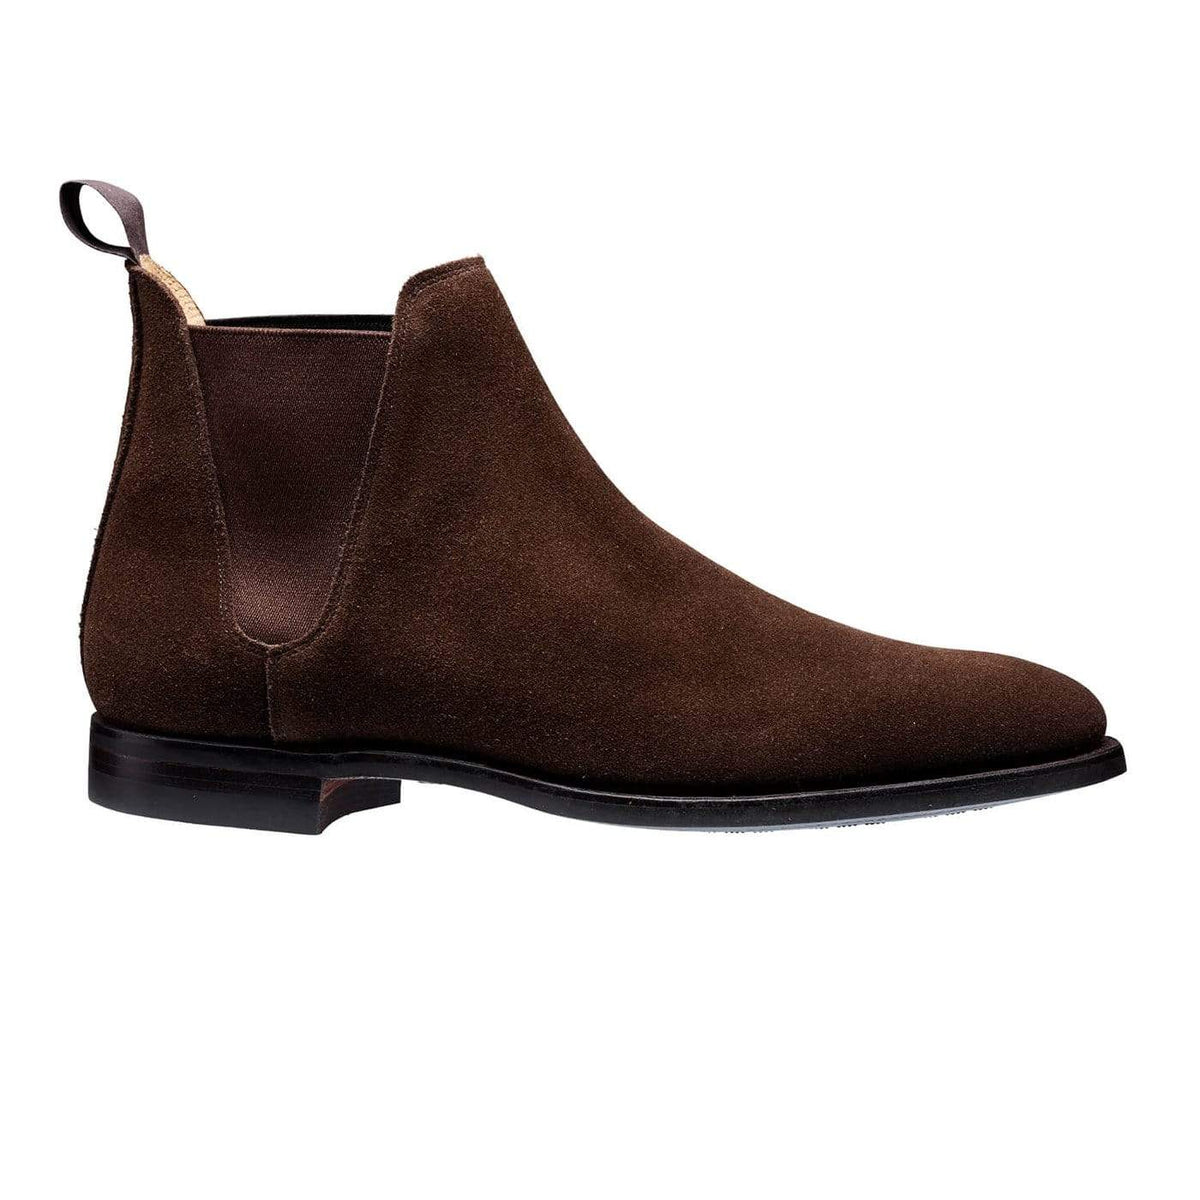 Best Chelsea Boots for Men: 8 Classic Pairs Style Experts